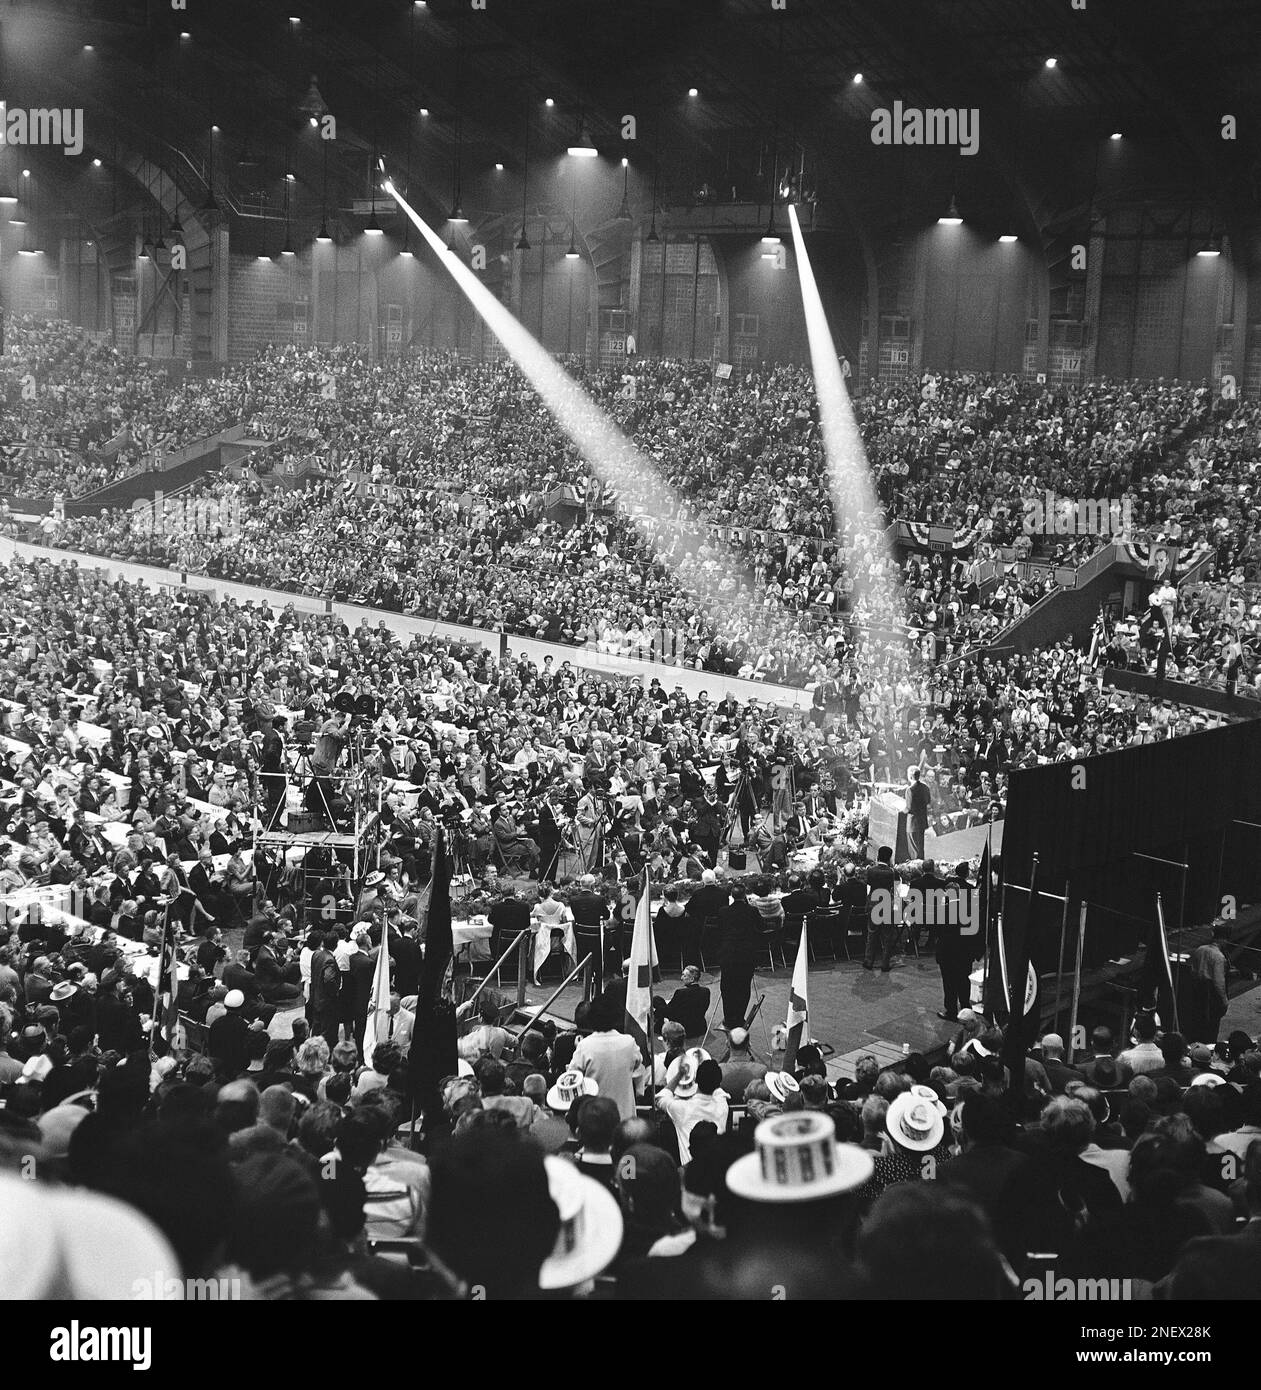 Sen. John Kennedy, standing in the cross of spotlights, speaks to a full house at the Indiana State Fairgrounds coliseum, Oct. 4, 1960 in Indianapolis, Indiana. Kennedy is on a two day tour of Indiana cities in his bid for the presidency. (AP Photo/Larry Stoddard) Foto Stock